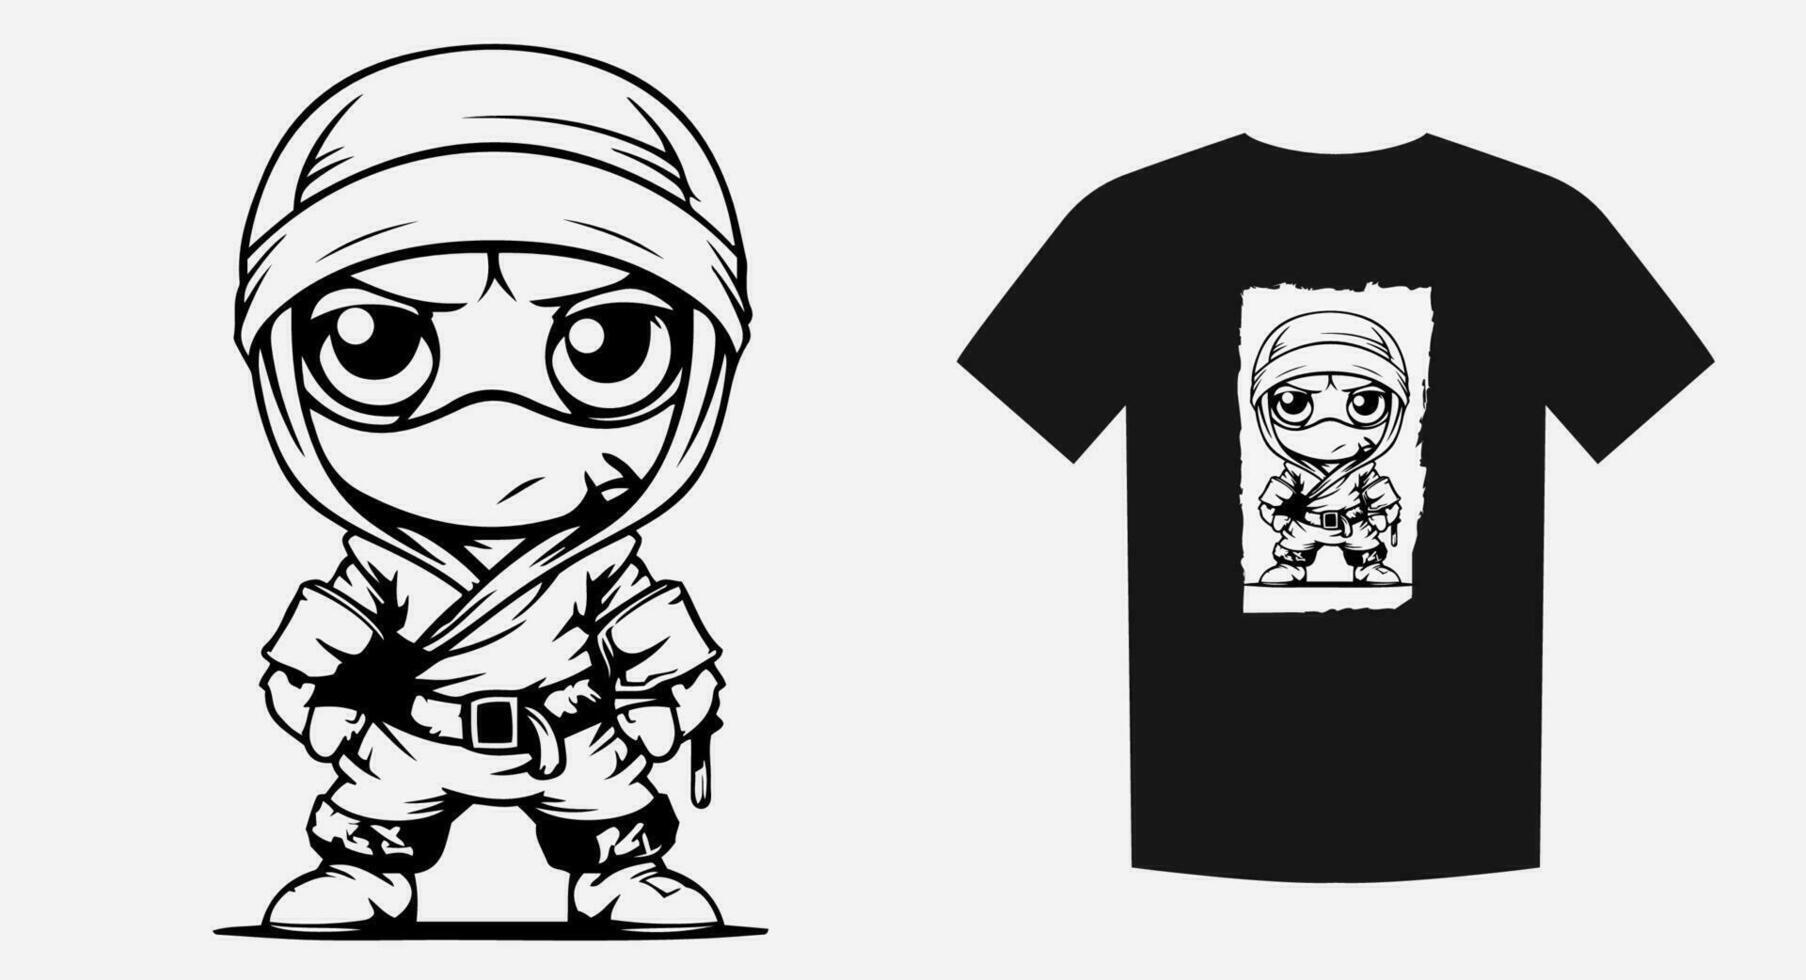 Playful ninja child in a monochrome cartoon style. Ideal for prints, shirts, and logos. Expressive and adventurous.. Vector illustration.